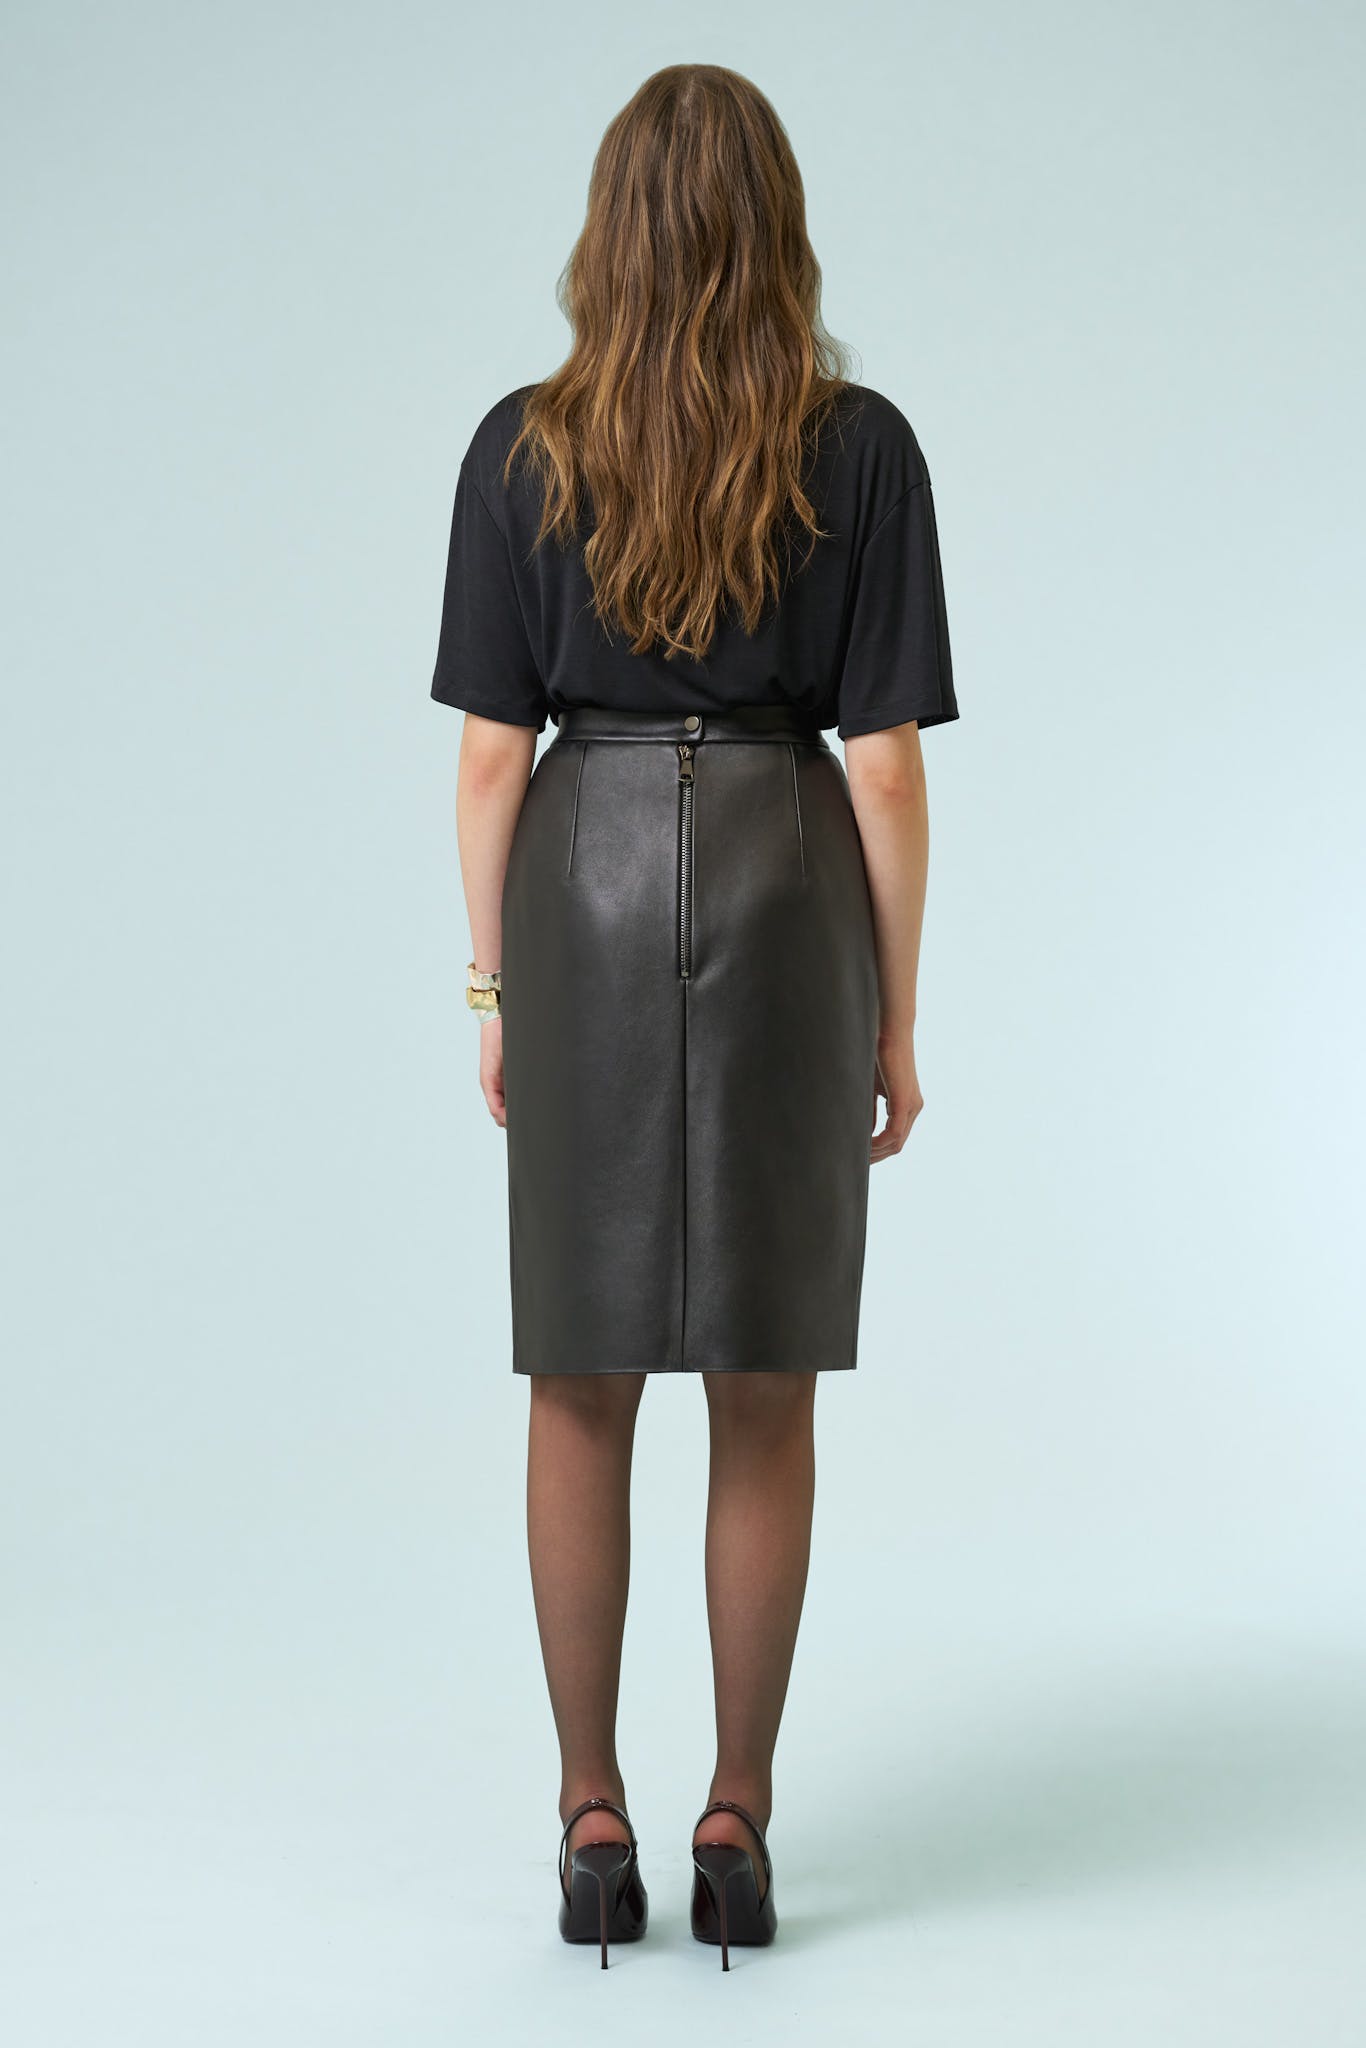 THE MOTION EDIT LEATHER PENCIL SKIRT